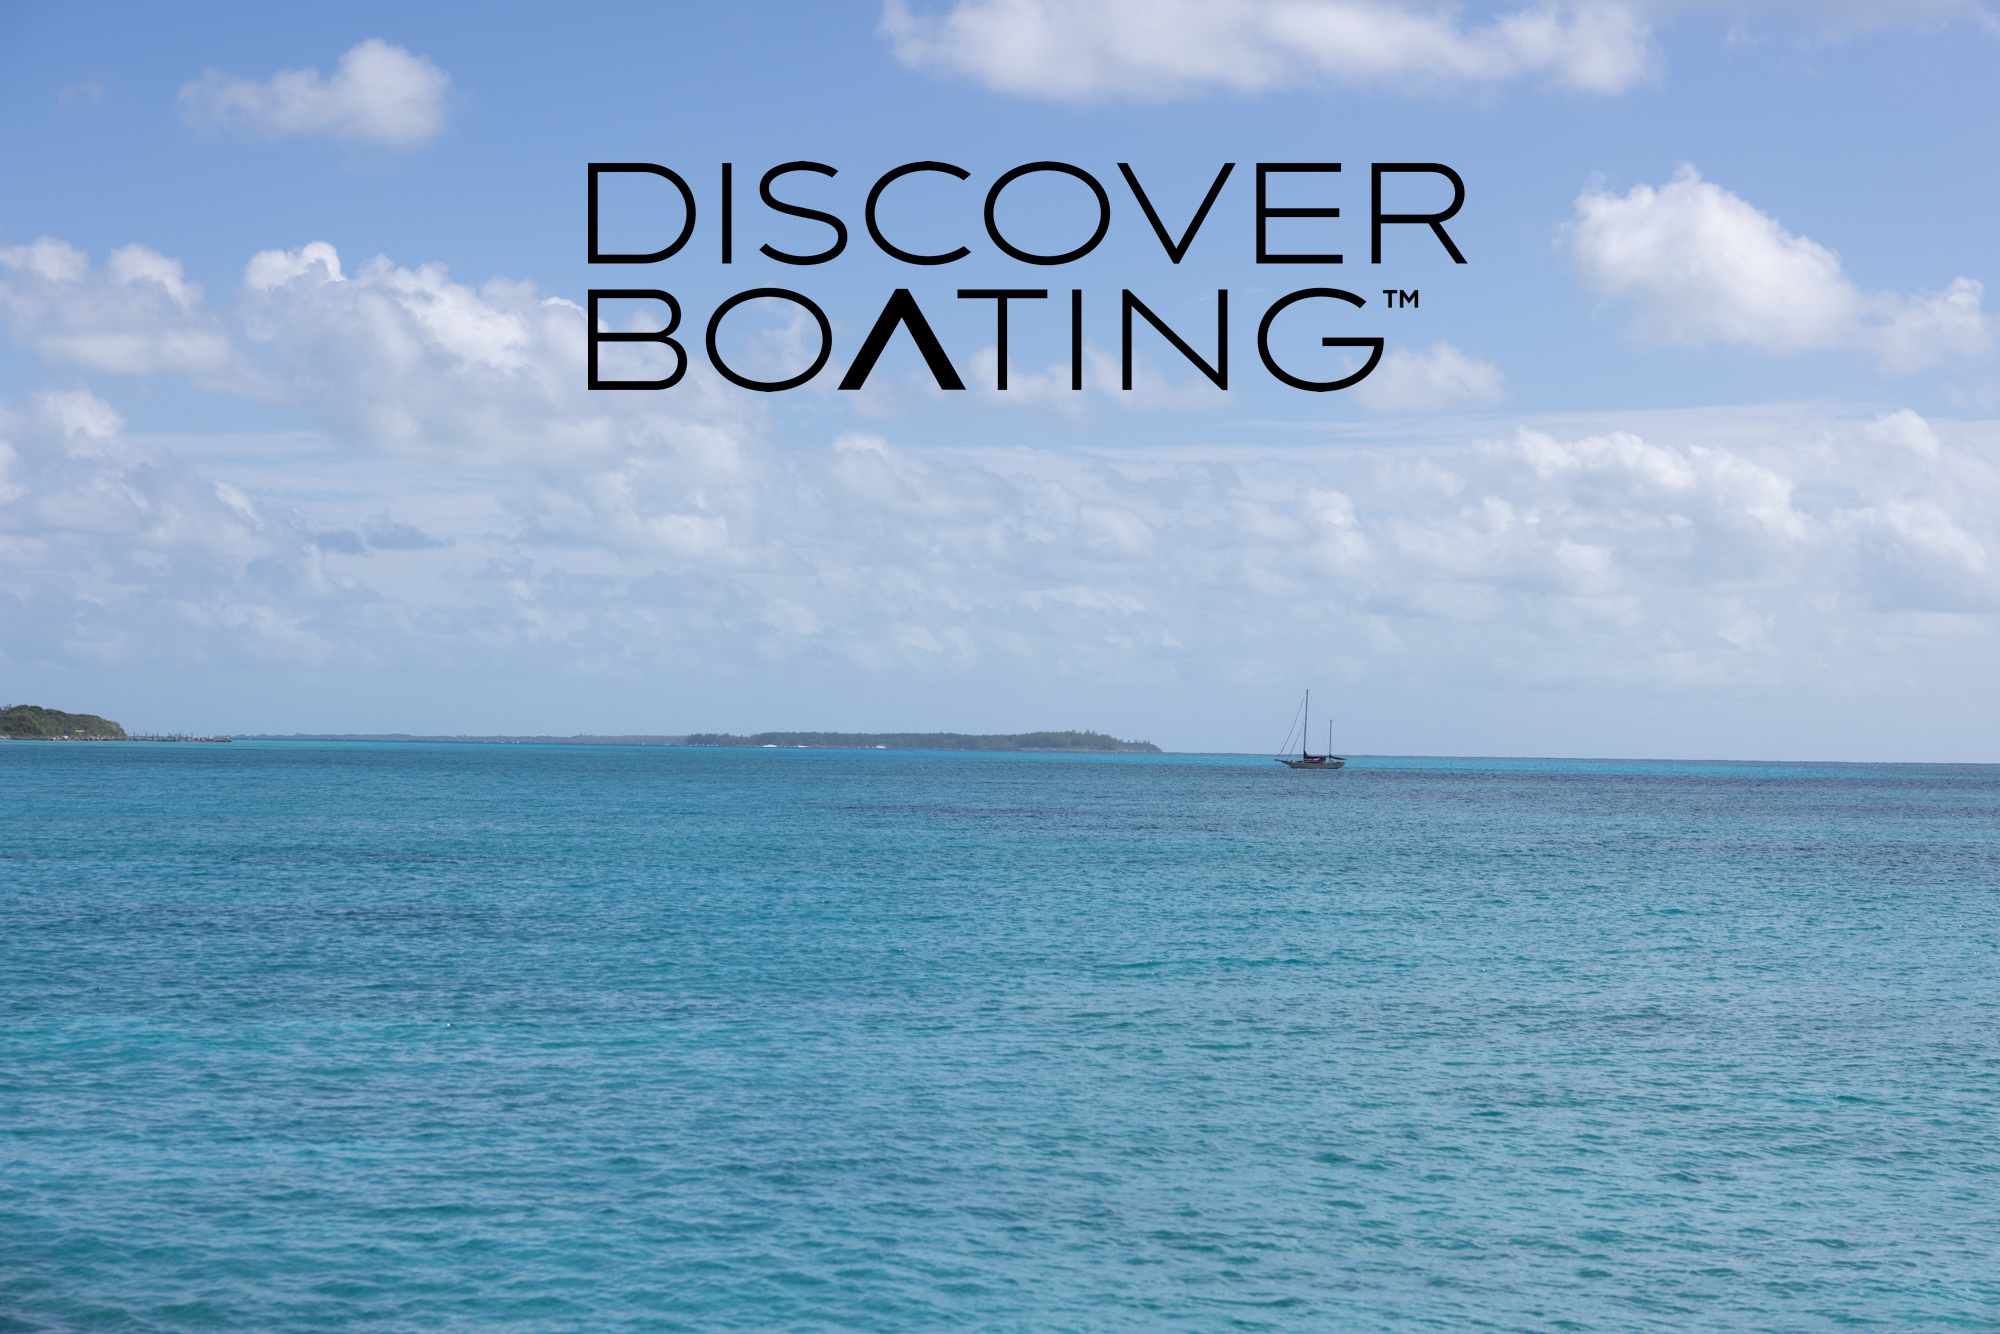 DiscoverBoating black logo overtop an image of distant boat on a tranquil blue sea.